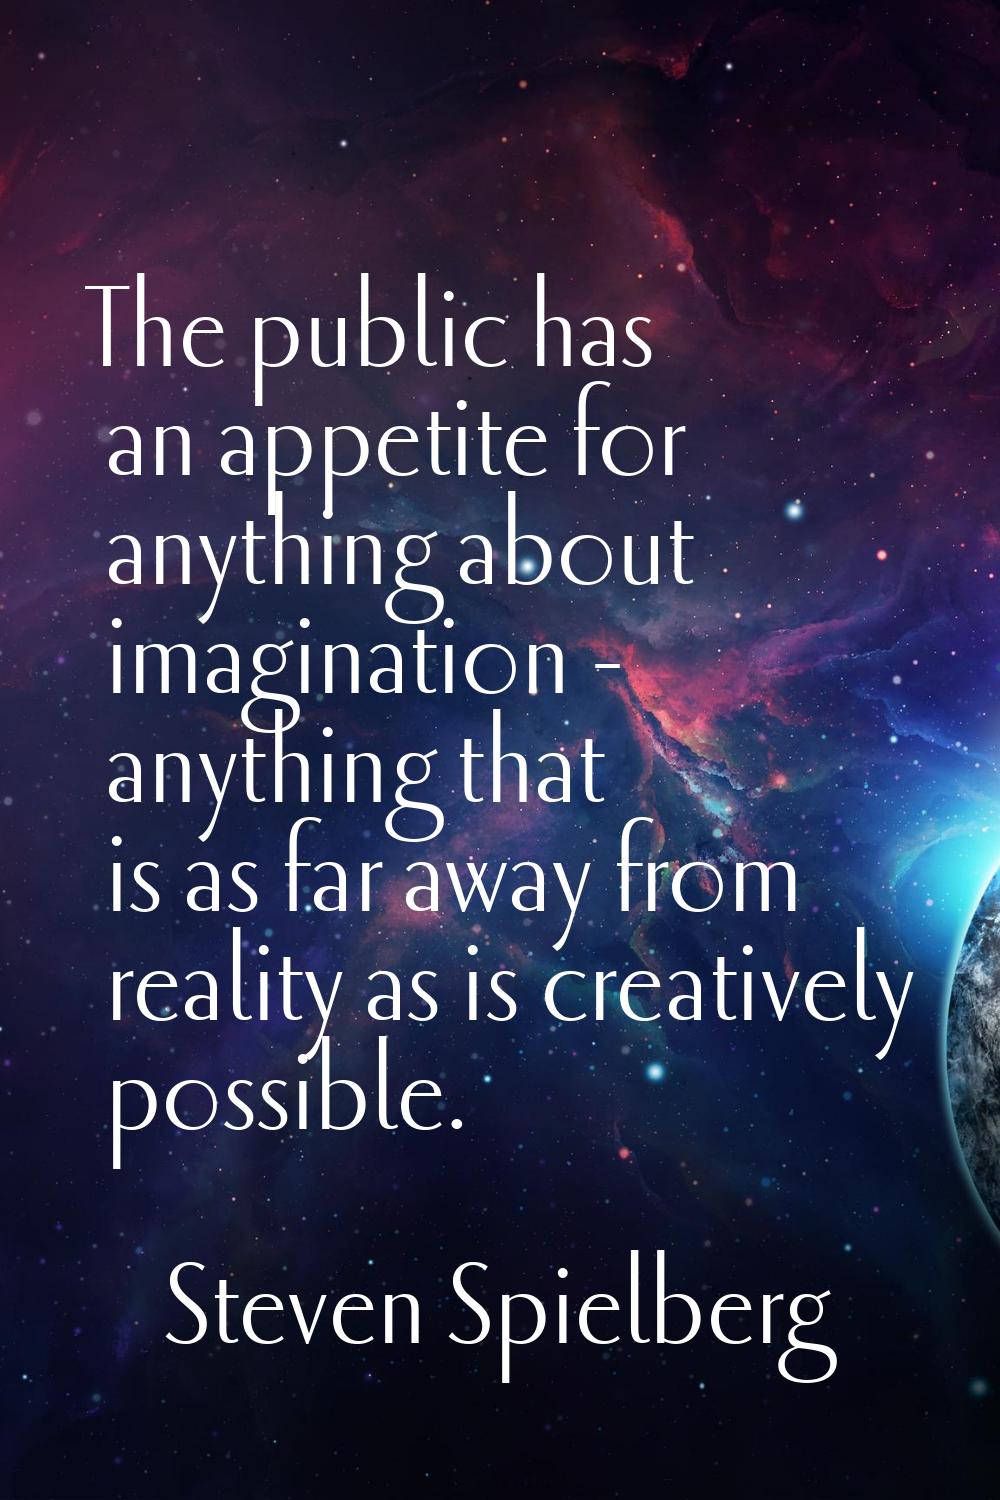 The public has an appetite for anything about imagination - anything that is as far away from reali